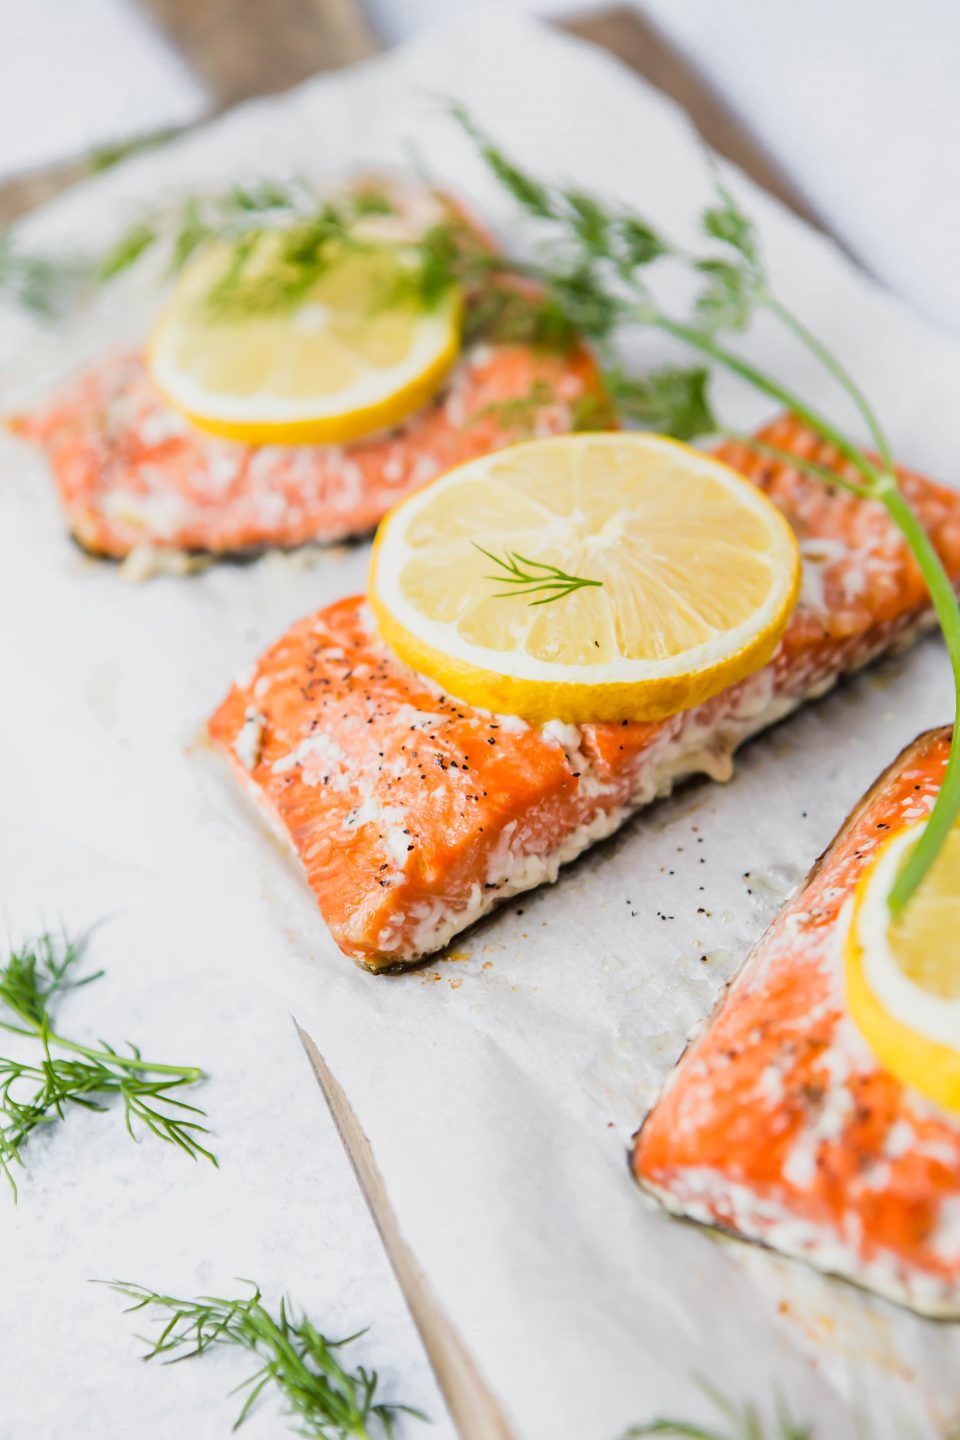 A 45 degree angle shot of three pieces of cooked salmon on parchment paper. Topped with lemon slices and garnished with dill.